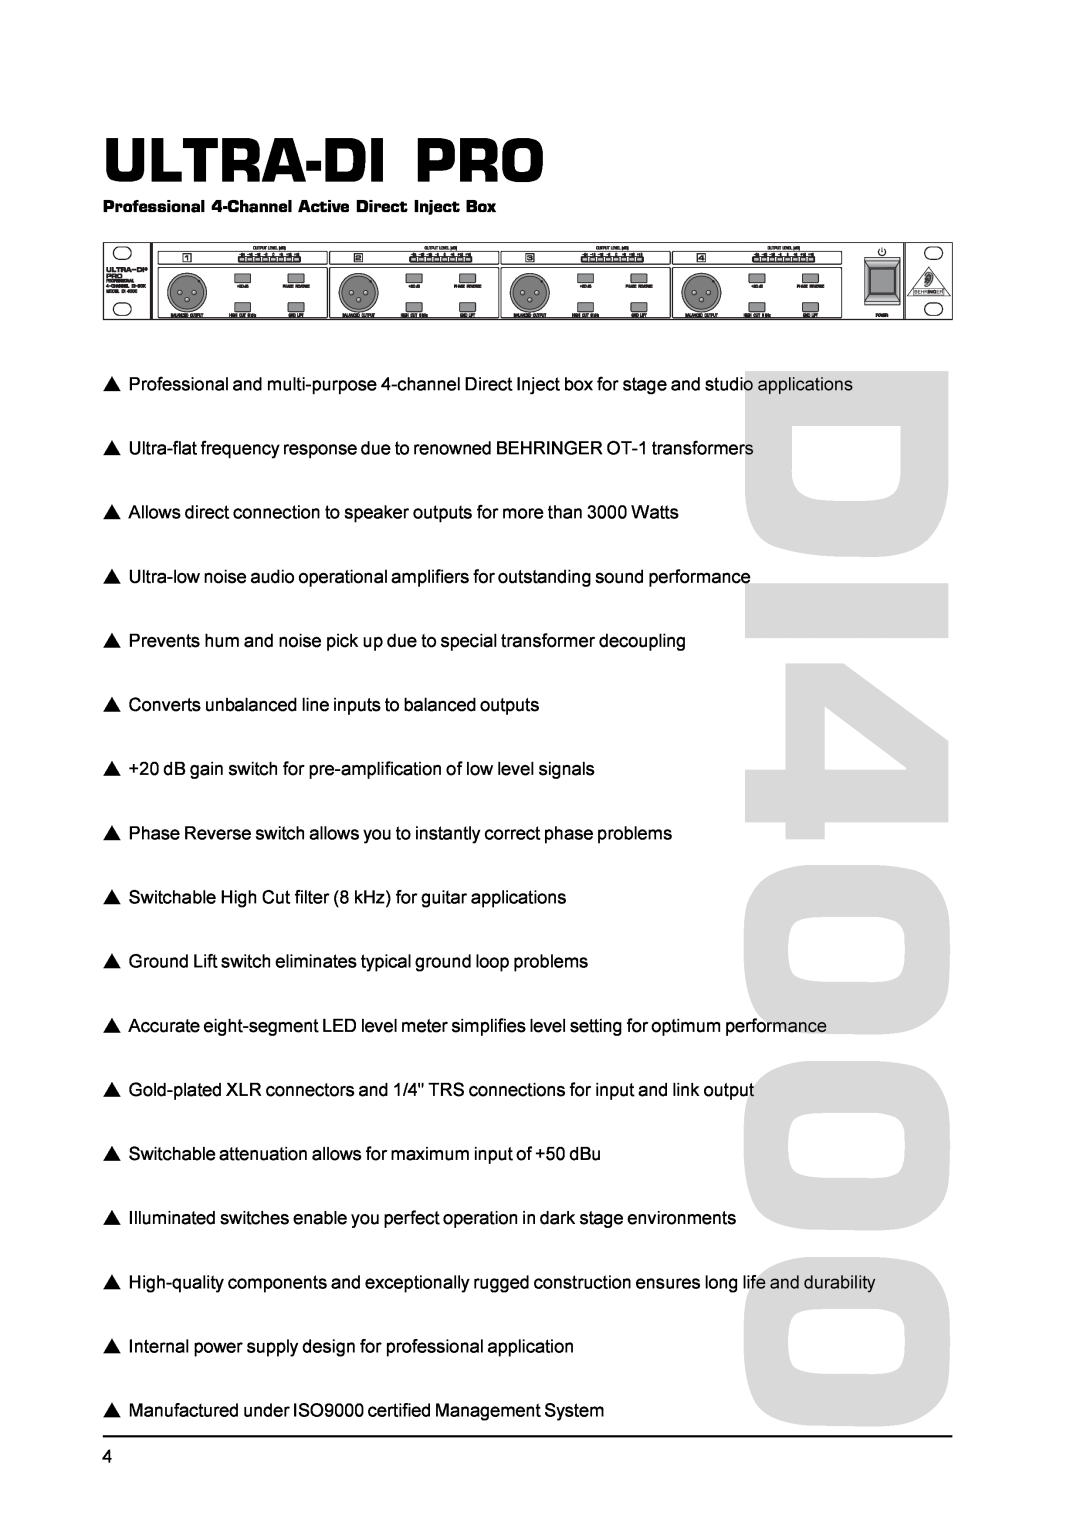 Behringer PRODI4000 user manual Ultra-Dipro, Professional 4-ChannelActive Direct Inject Box 